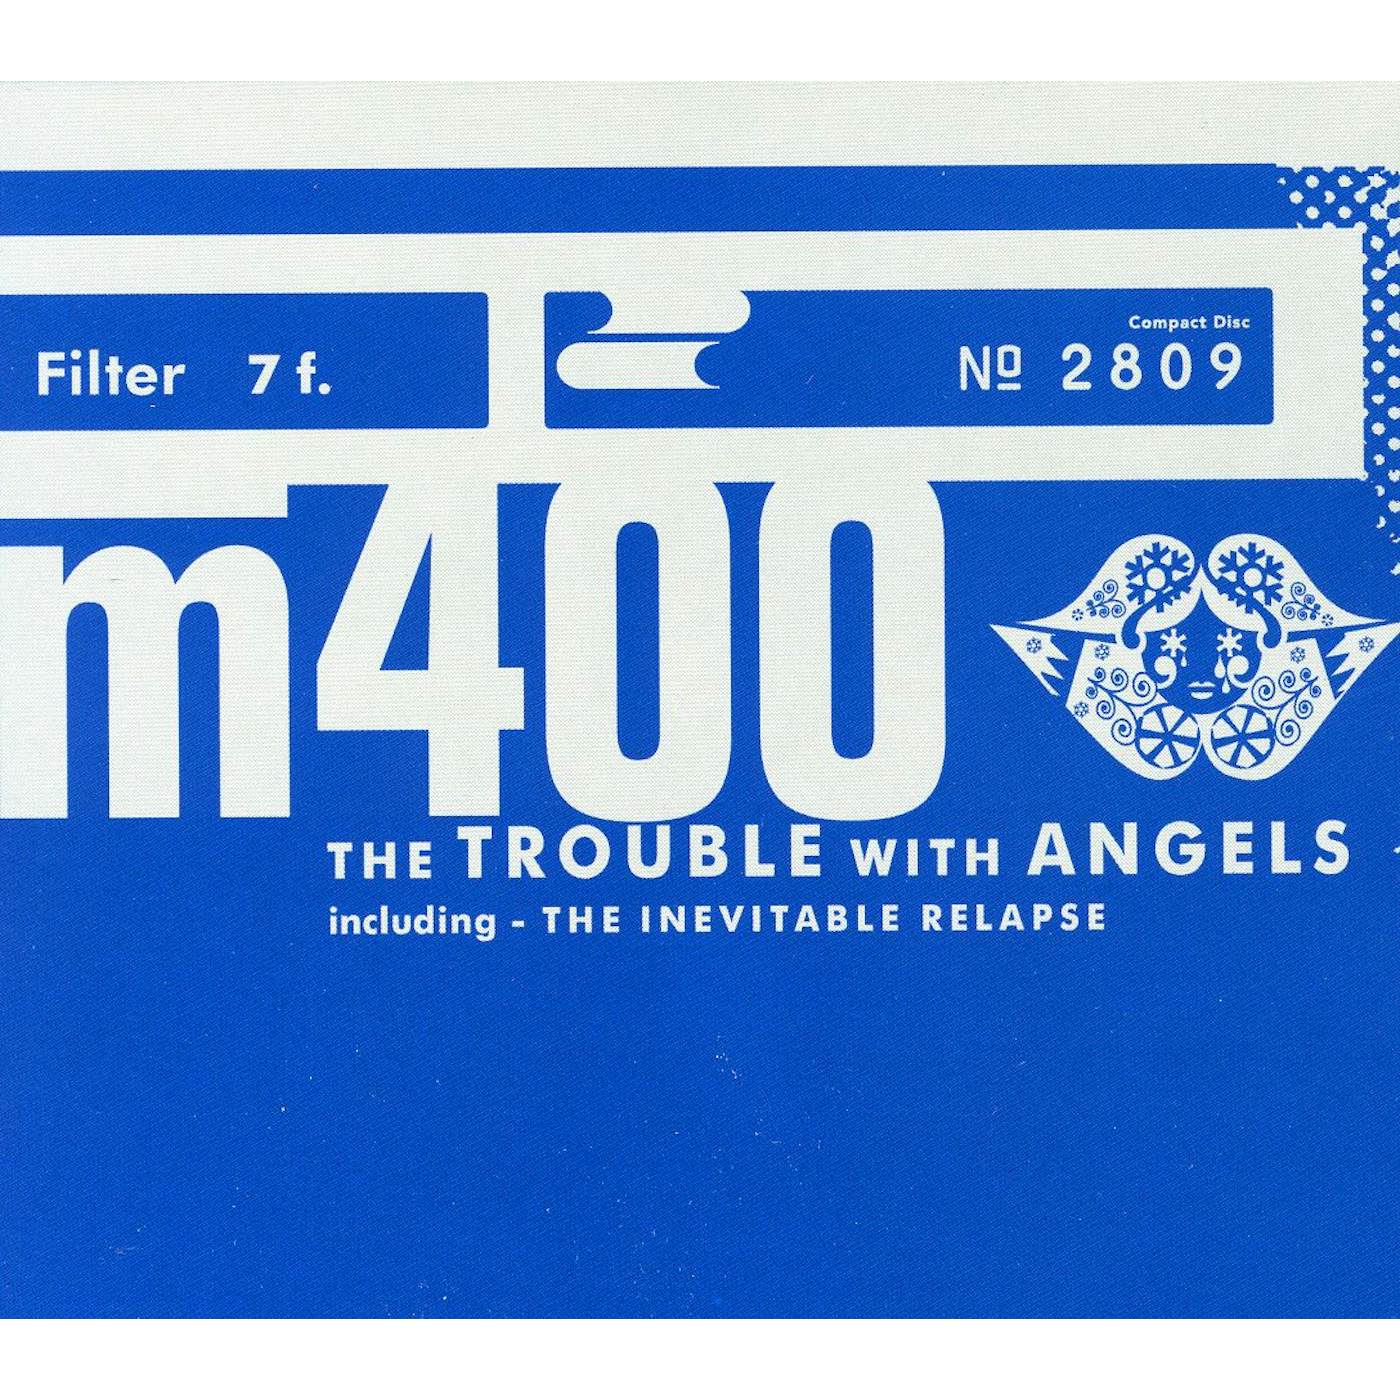 Filter TROUBLE WITH ANGELS CD